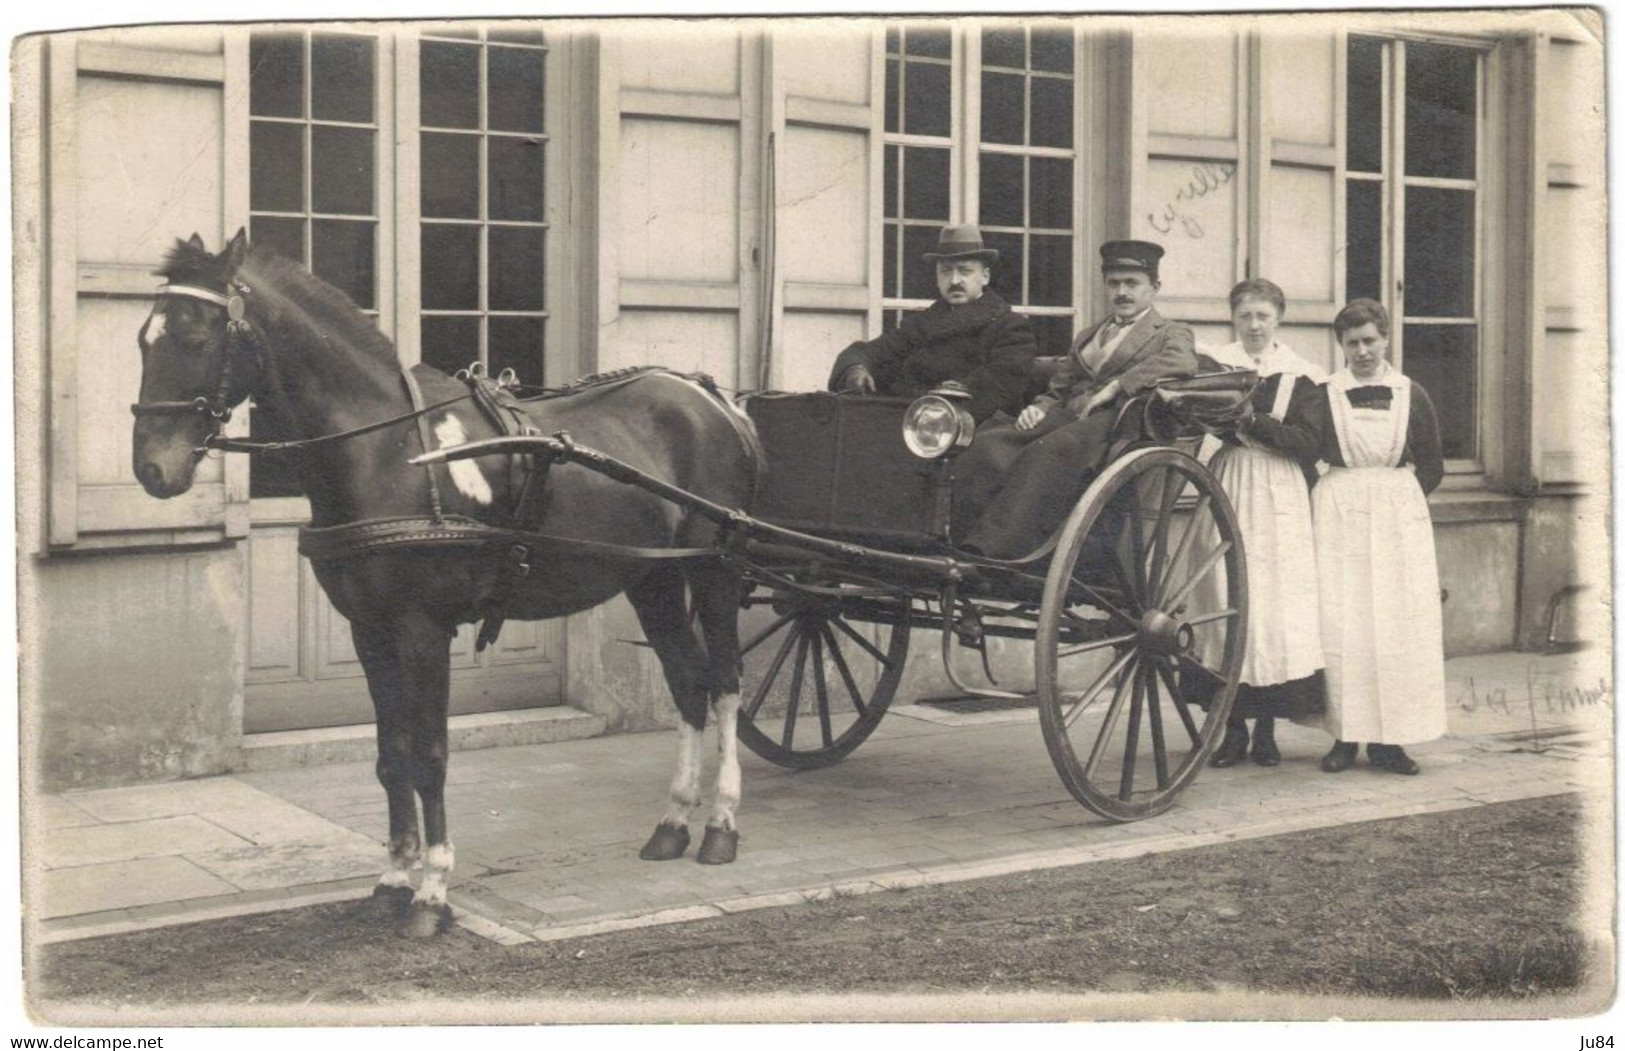 Carte Postale Photo - Fiacre - Taxi -  Famille - Belle Photo - Cheval - Taxis & Fiacres